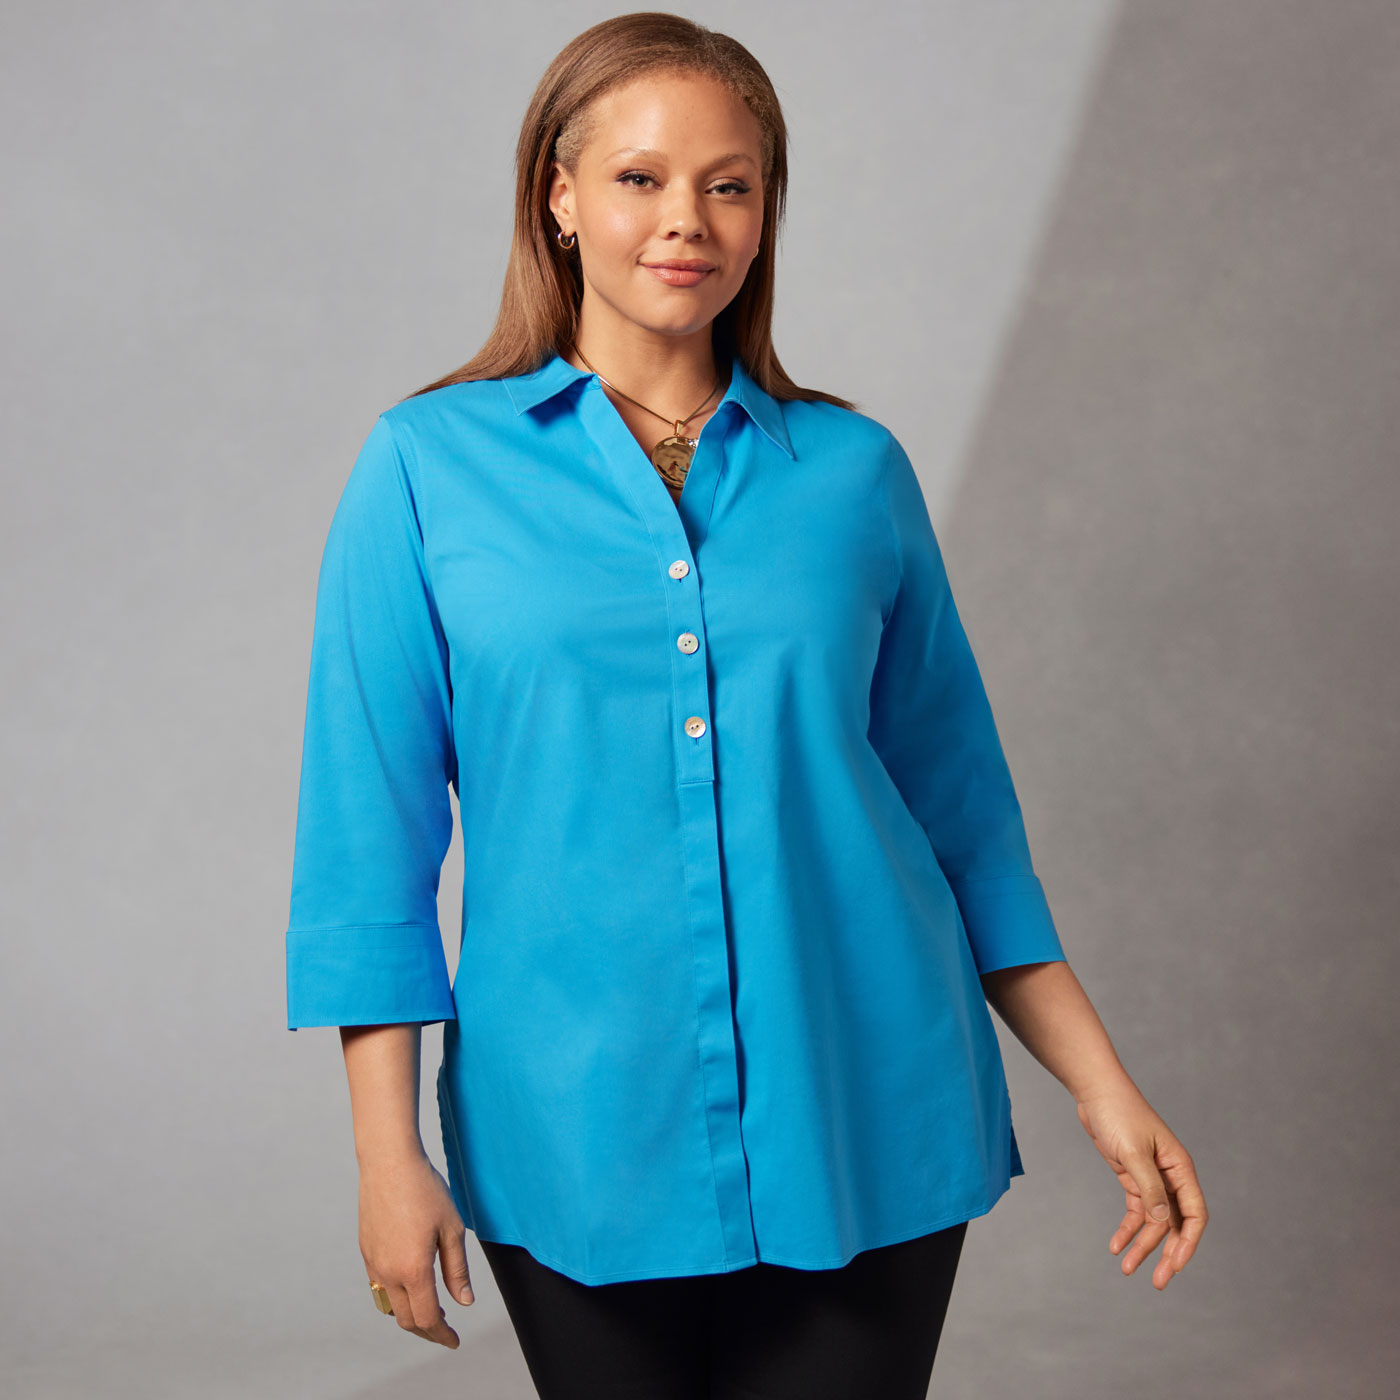 Discover Non-Iron and Wrinkle-Free Technology- Foxcroft